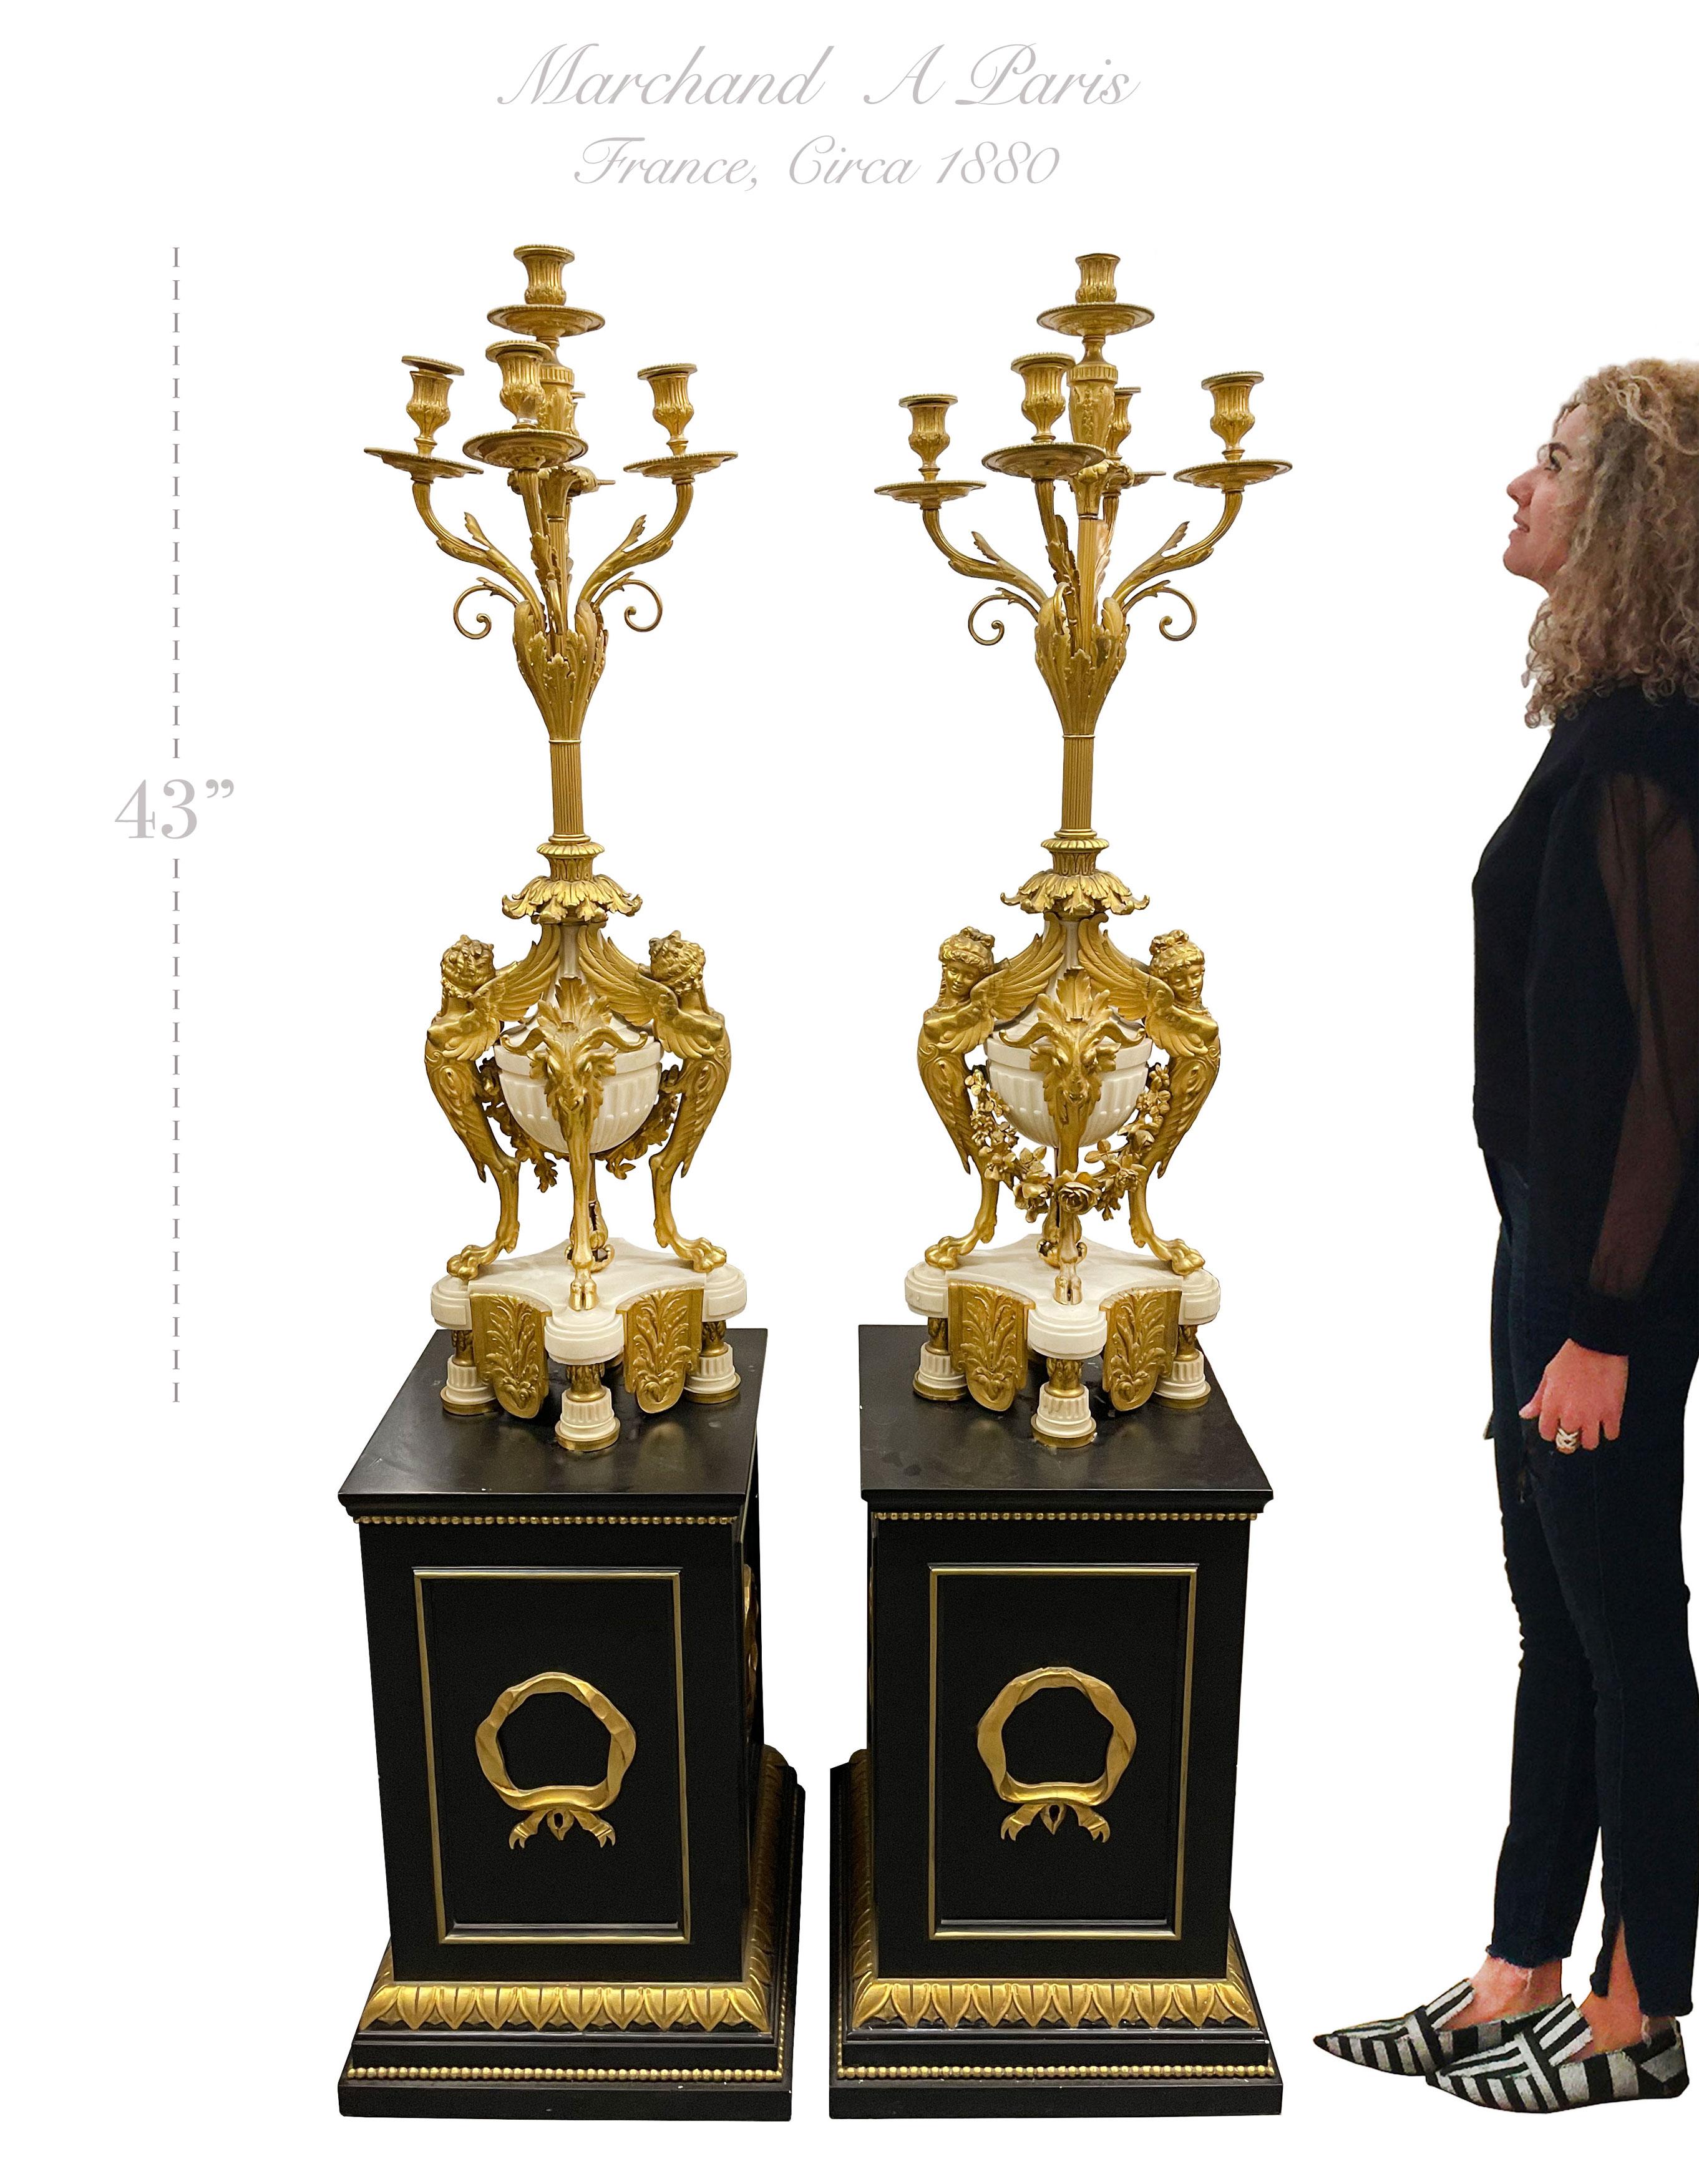 A pair of French ormolu & white marble candelabras by Marchand à Paris, Circa 1880

Note: The stands are not included.

Measure: H: 44